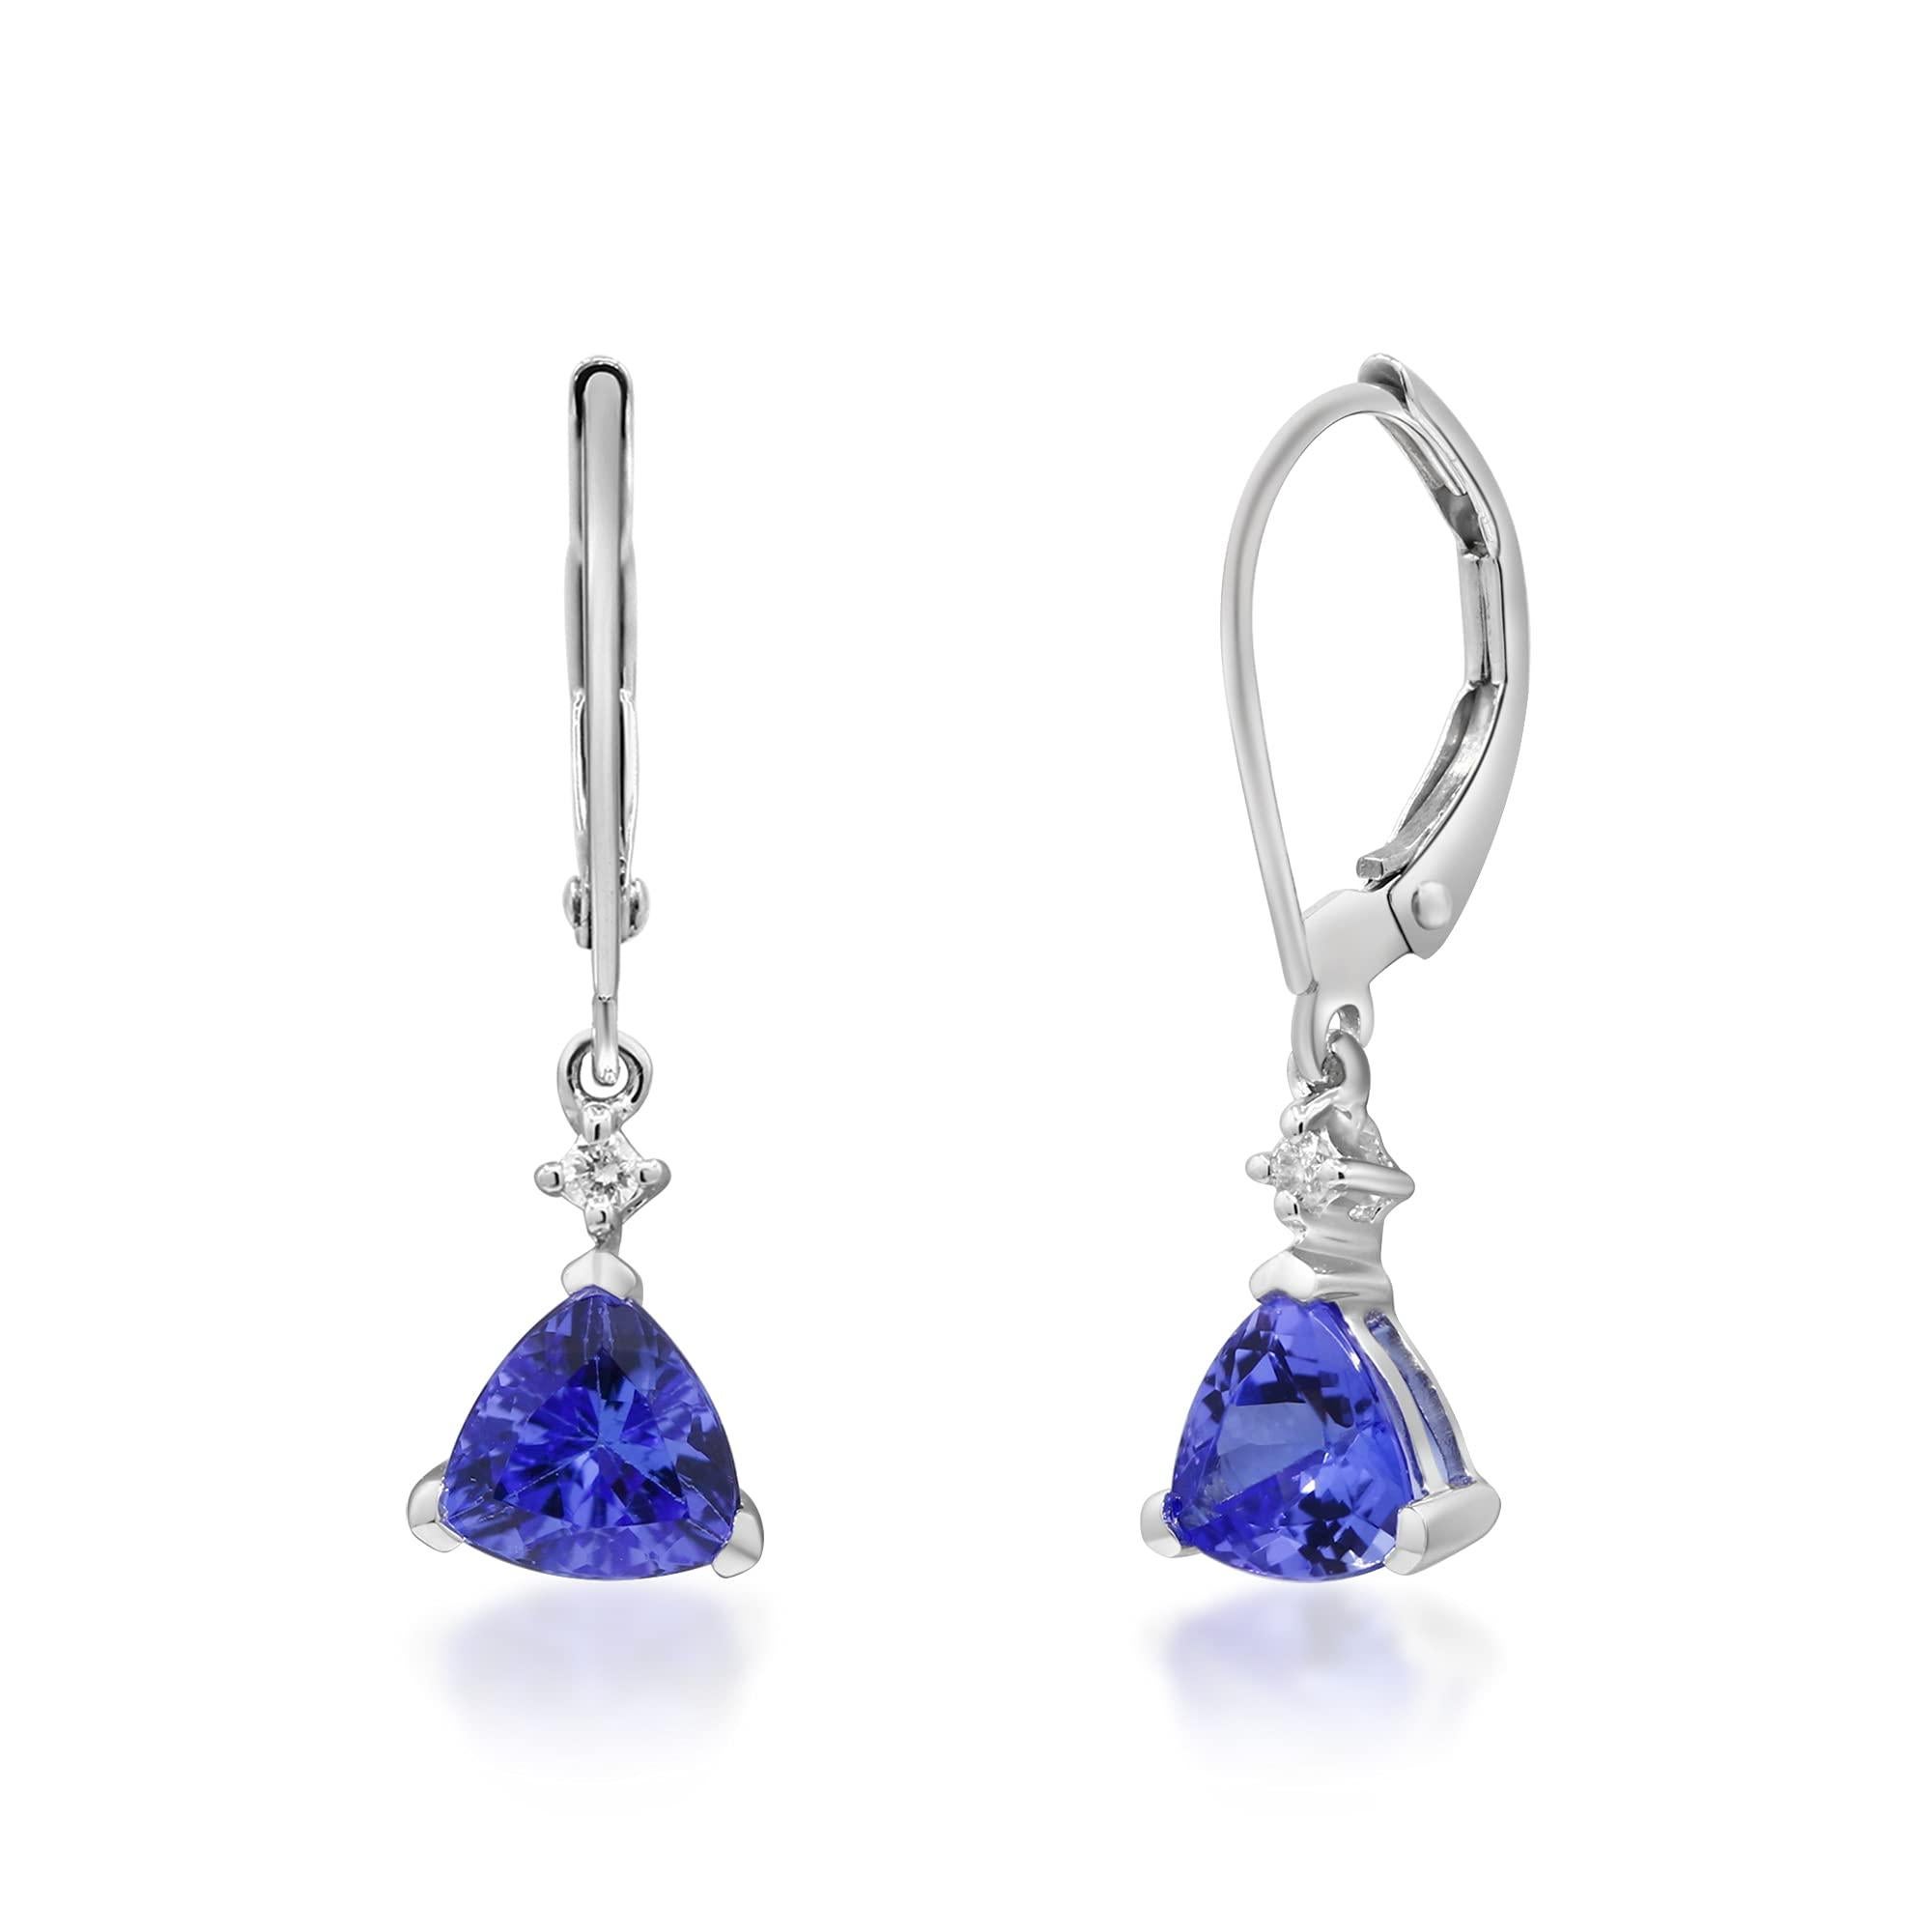 Each of these pretty earrings features a brilliant trillion-cut tanzanite gemstone dangling under a fiery Gin& Grace Natural white diamond accent. A highly polished finish completes the elegant look of these 14-karat white gold earrings. Style: